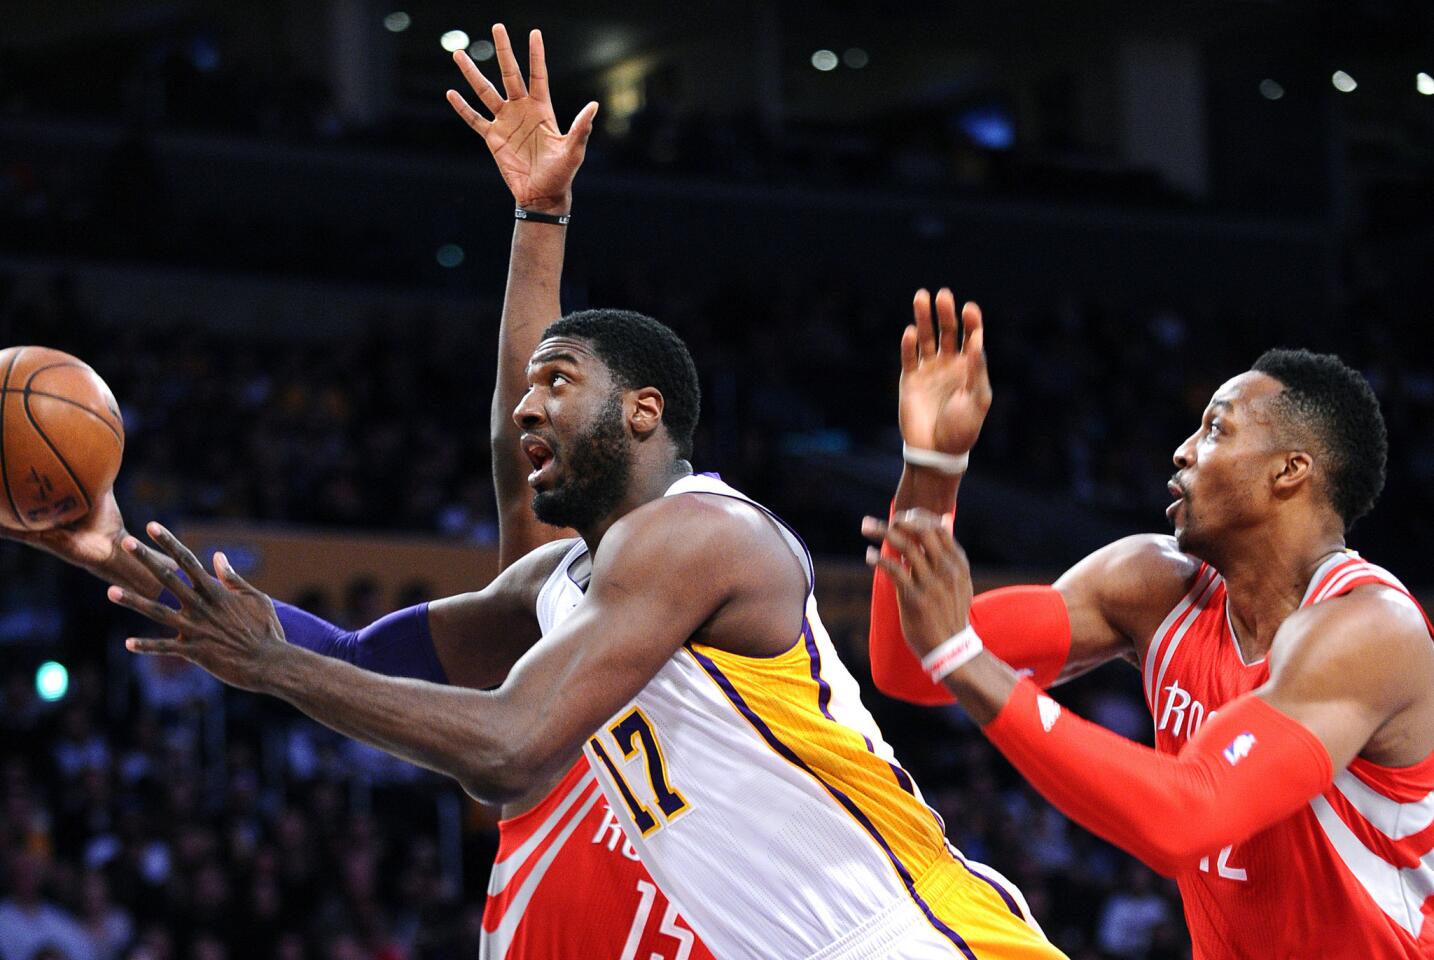 Lakers' Roy Hibbert goes about his business without fanfare or complaints